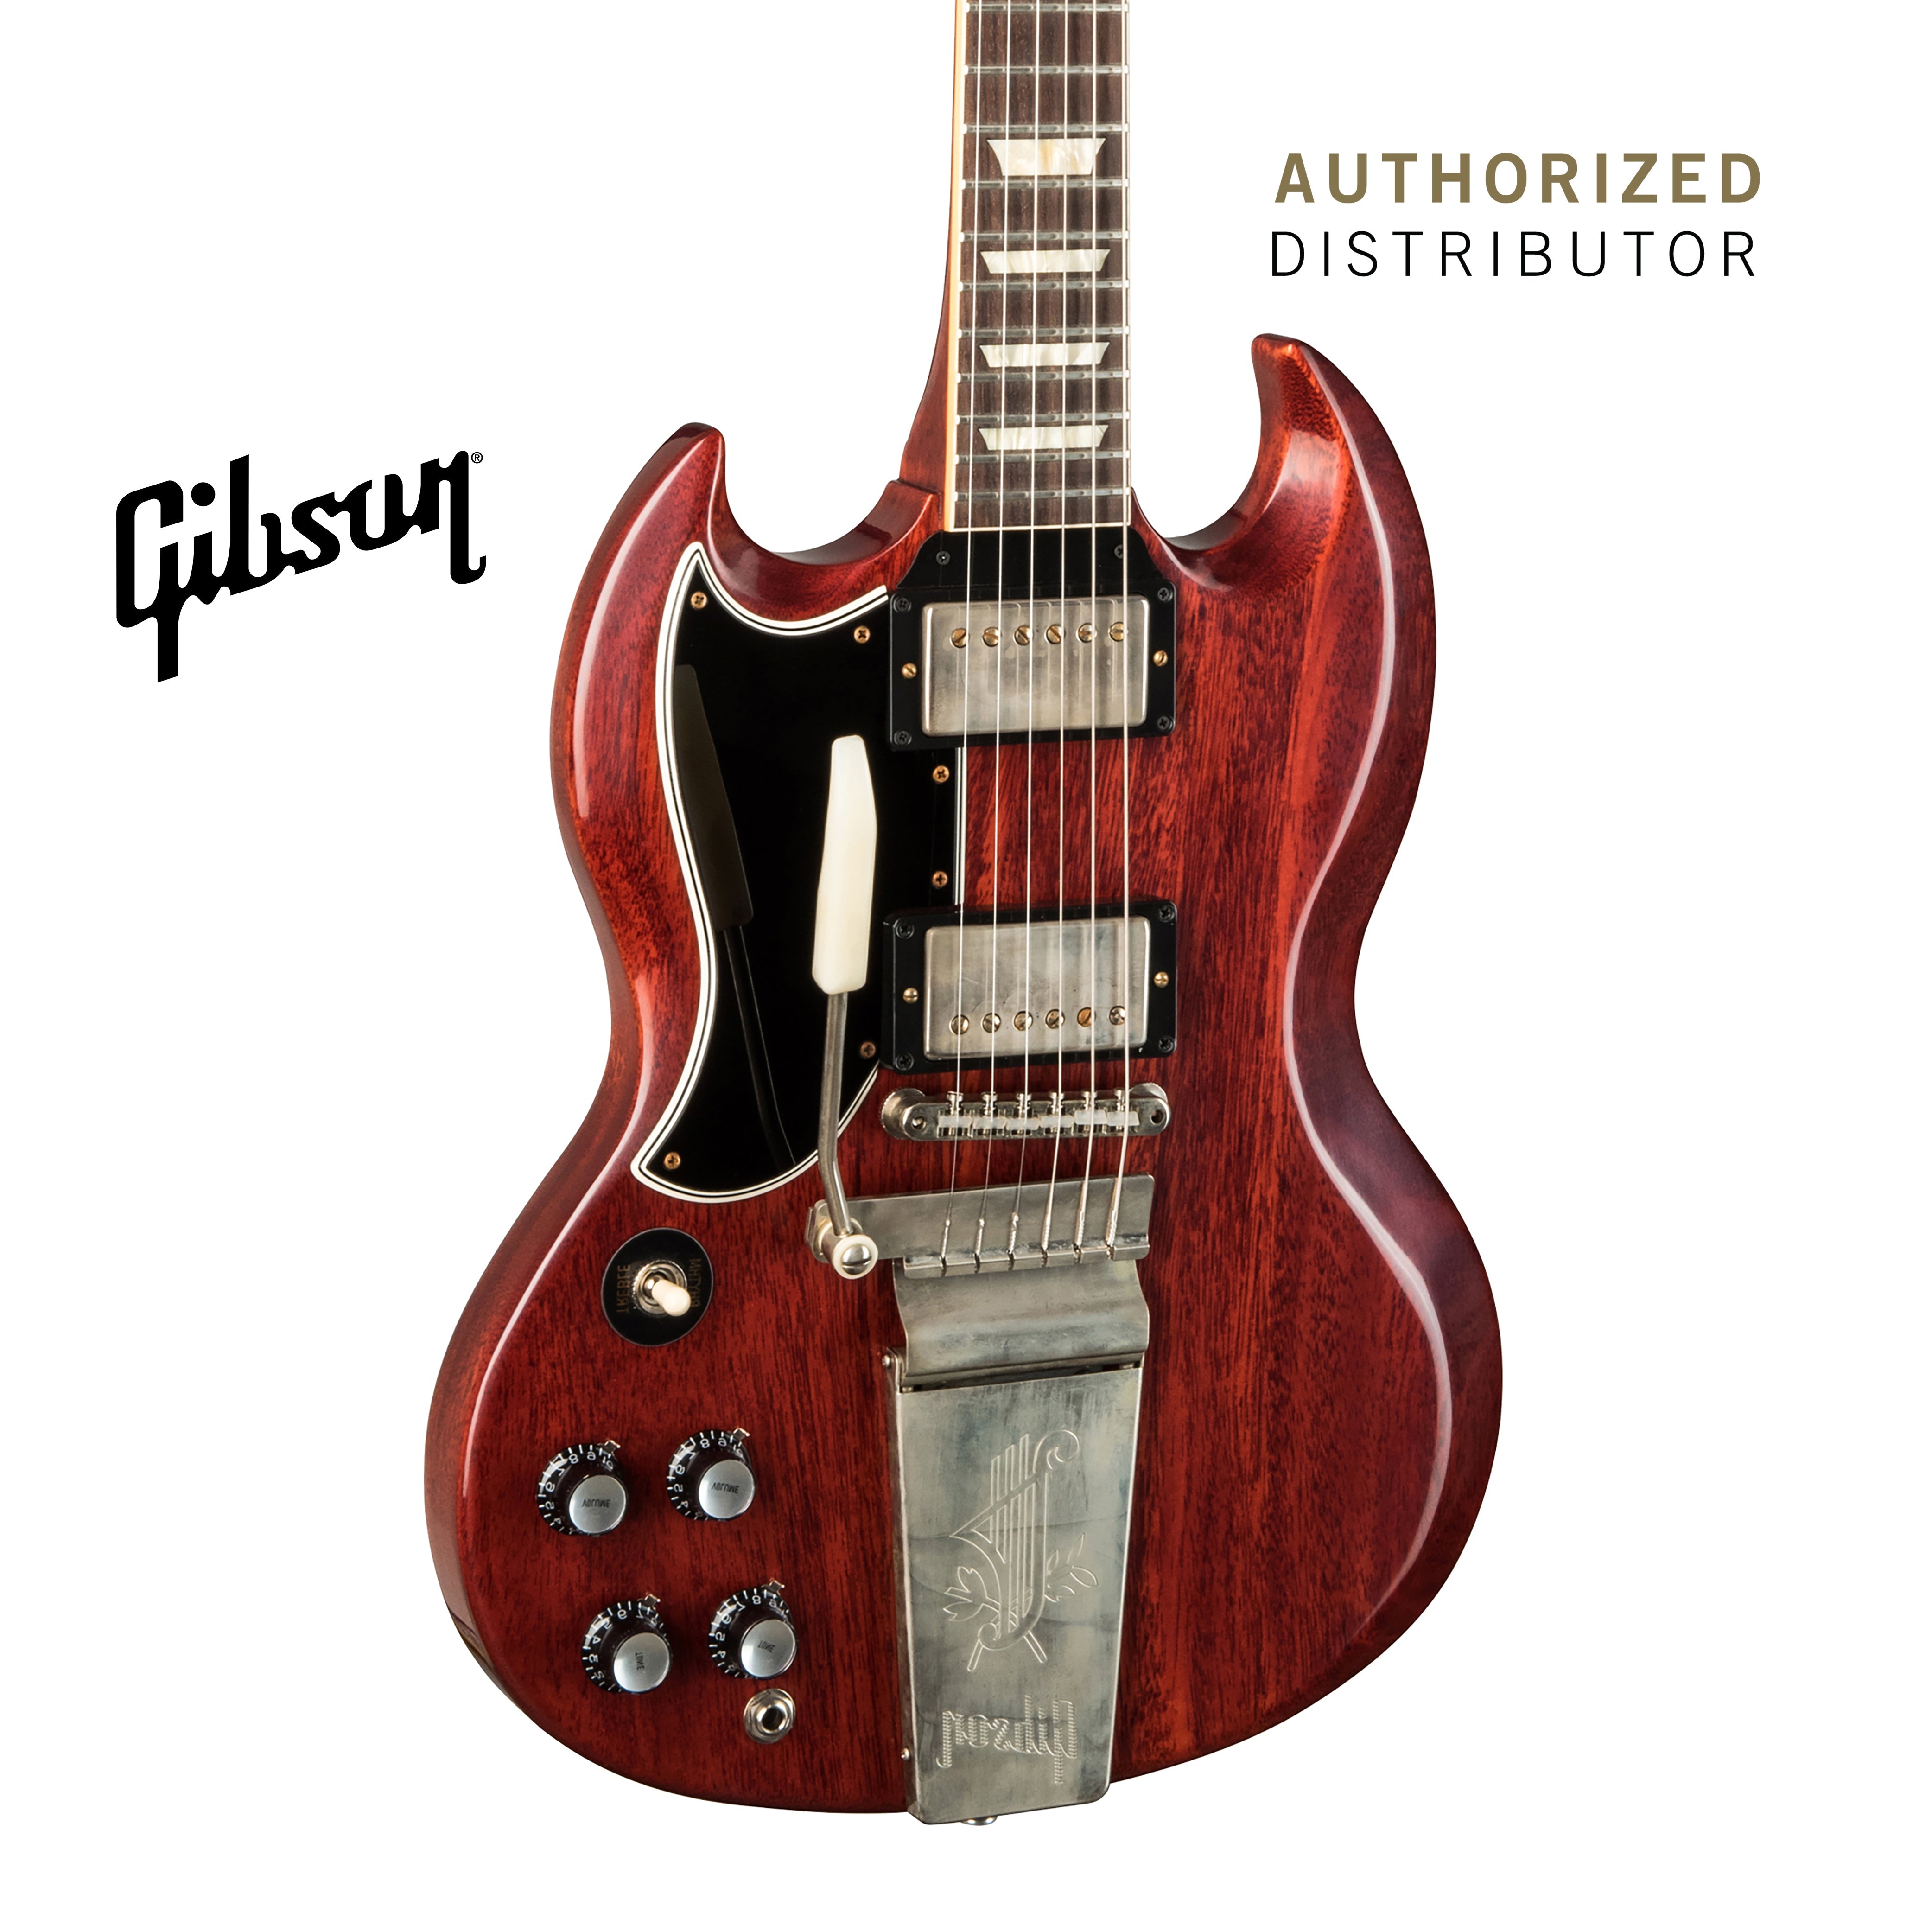 GIBSON 1964 SG STANDARD REISSUE WITH MAESTRO VIBROLA VOS LEFT-HANDED ELECTRIC ELECTRIC GUITAR - CHERRY RED